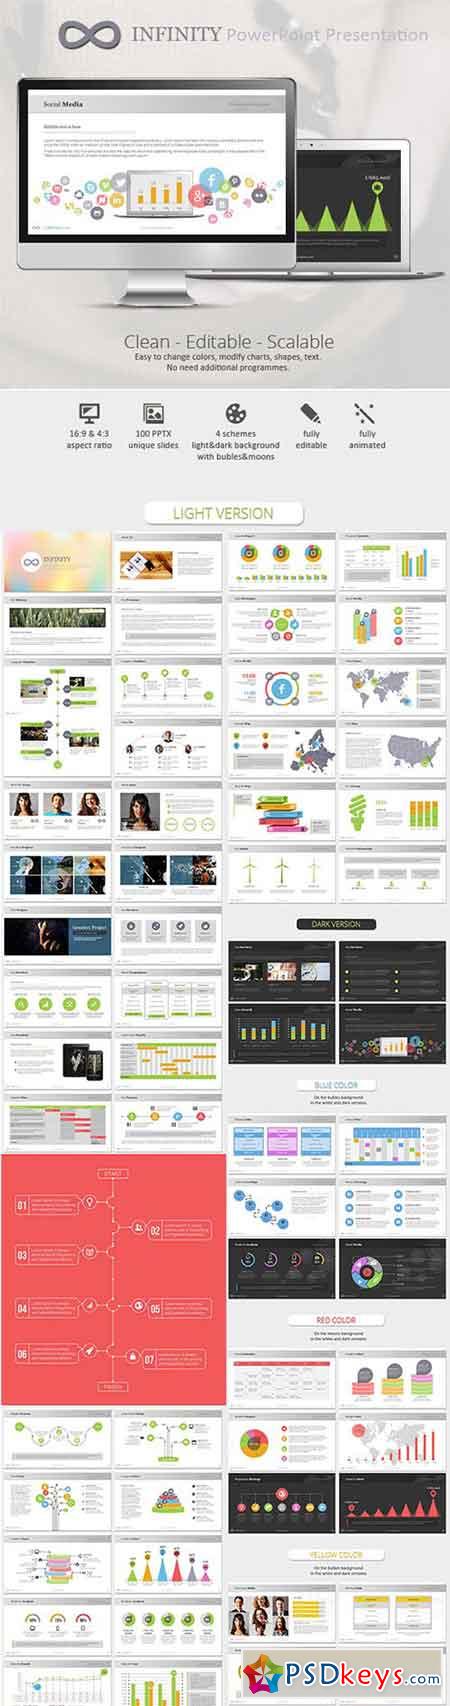 Infinity Colors PowerPoint Presentation Template 9101039